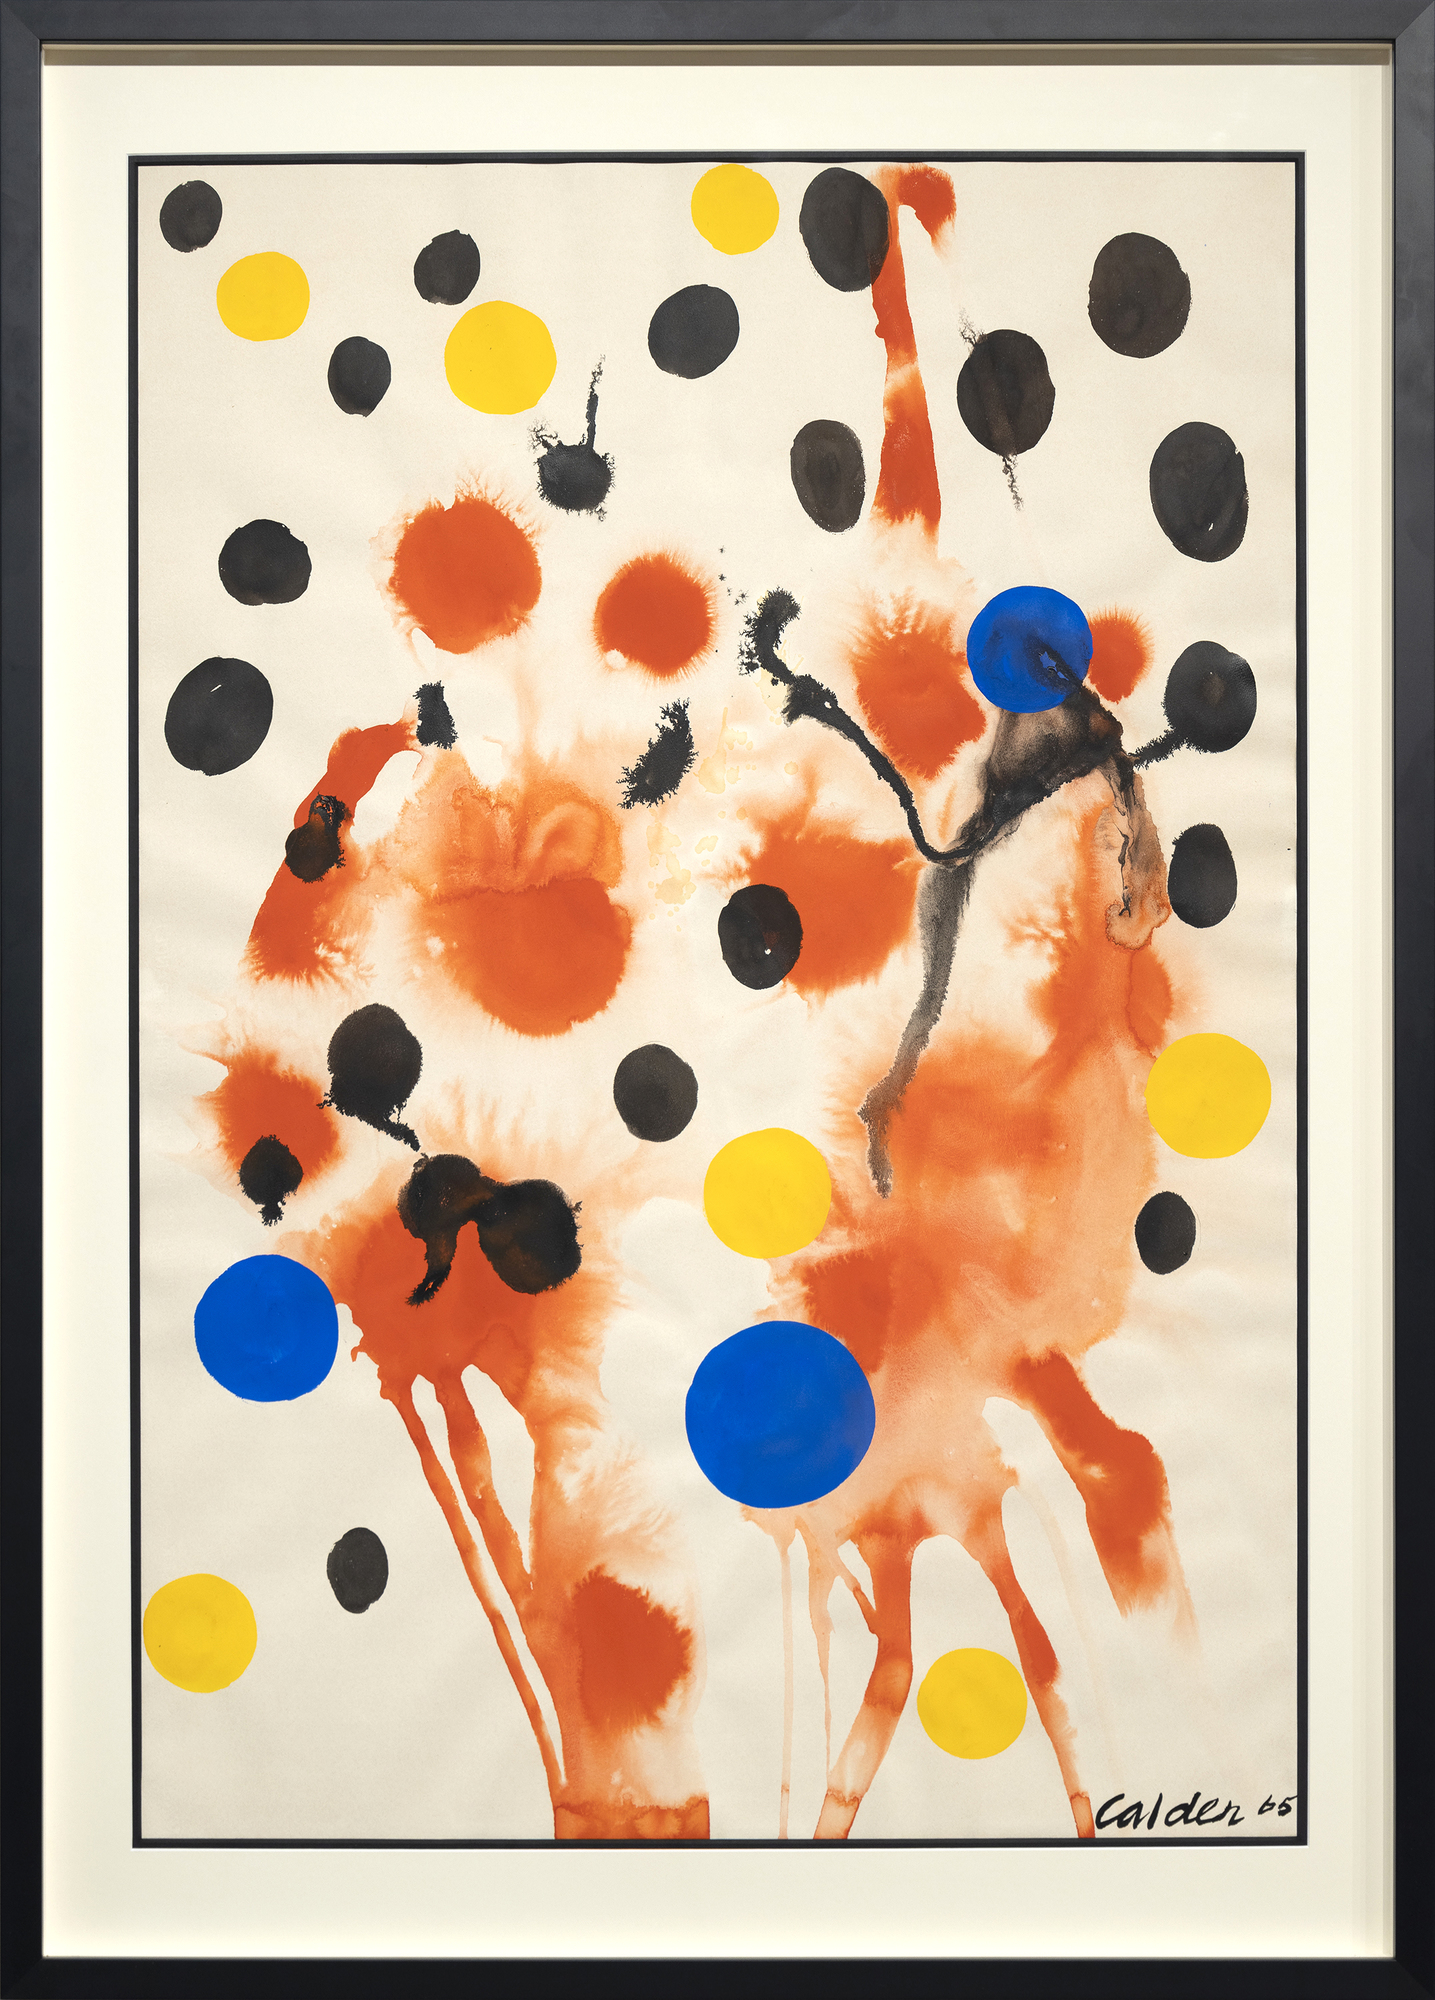 Alexander Calder's Rouge Mouille (Wet Red) features a background of red circles, some dispersing like explosions, creating a sense of energetic expansion, and others running downward as if streaming trails of a firework display. This animated backdrop is adorned with numerous opaque round balls, predominantly black, but interspersed with striking blue, red, and subtle yellow spheres. The strategic placement of the colorful spheres against the explosive reds captures the awe and spectacle of a fireworks show, transforming the painting into a visual metaphor for this dazzling and celebratory event. The artwork resonates with excitement and vibrancy, encapsulating its ephemeral beauty in a static medium.